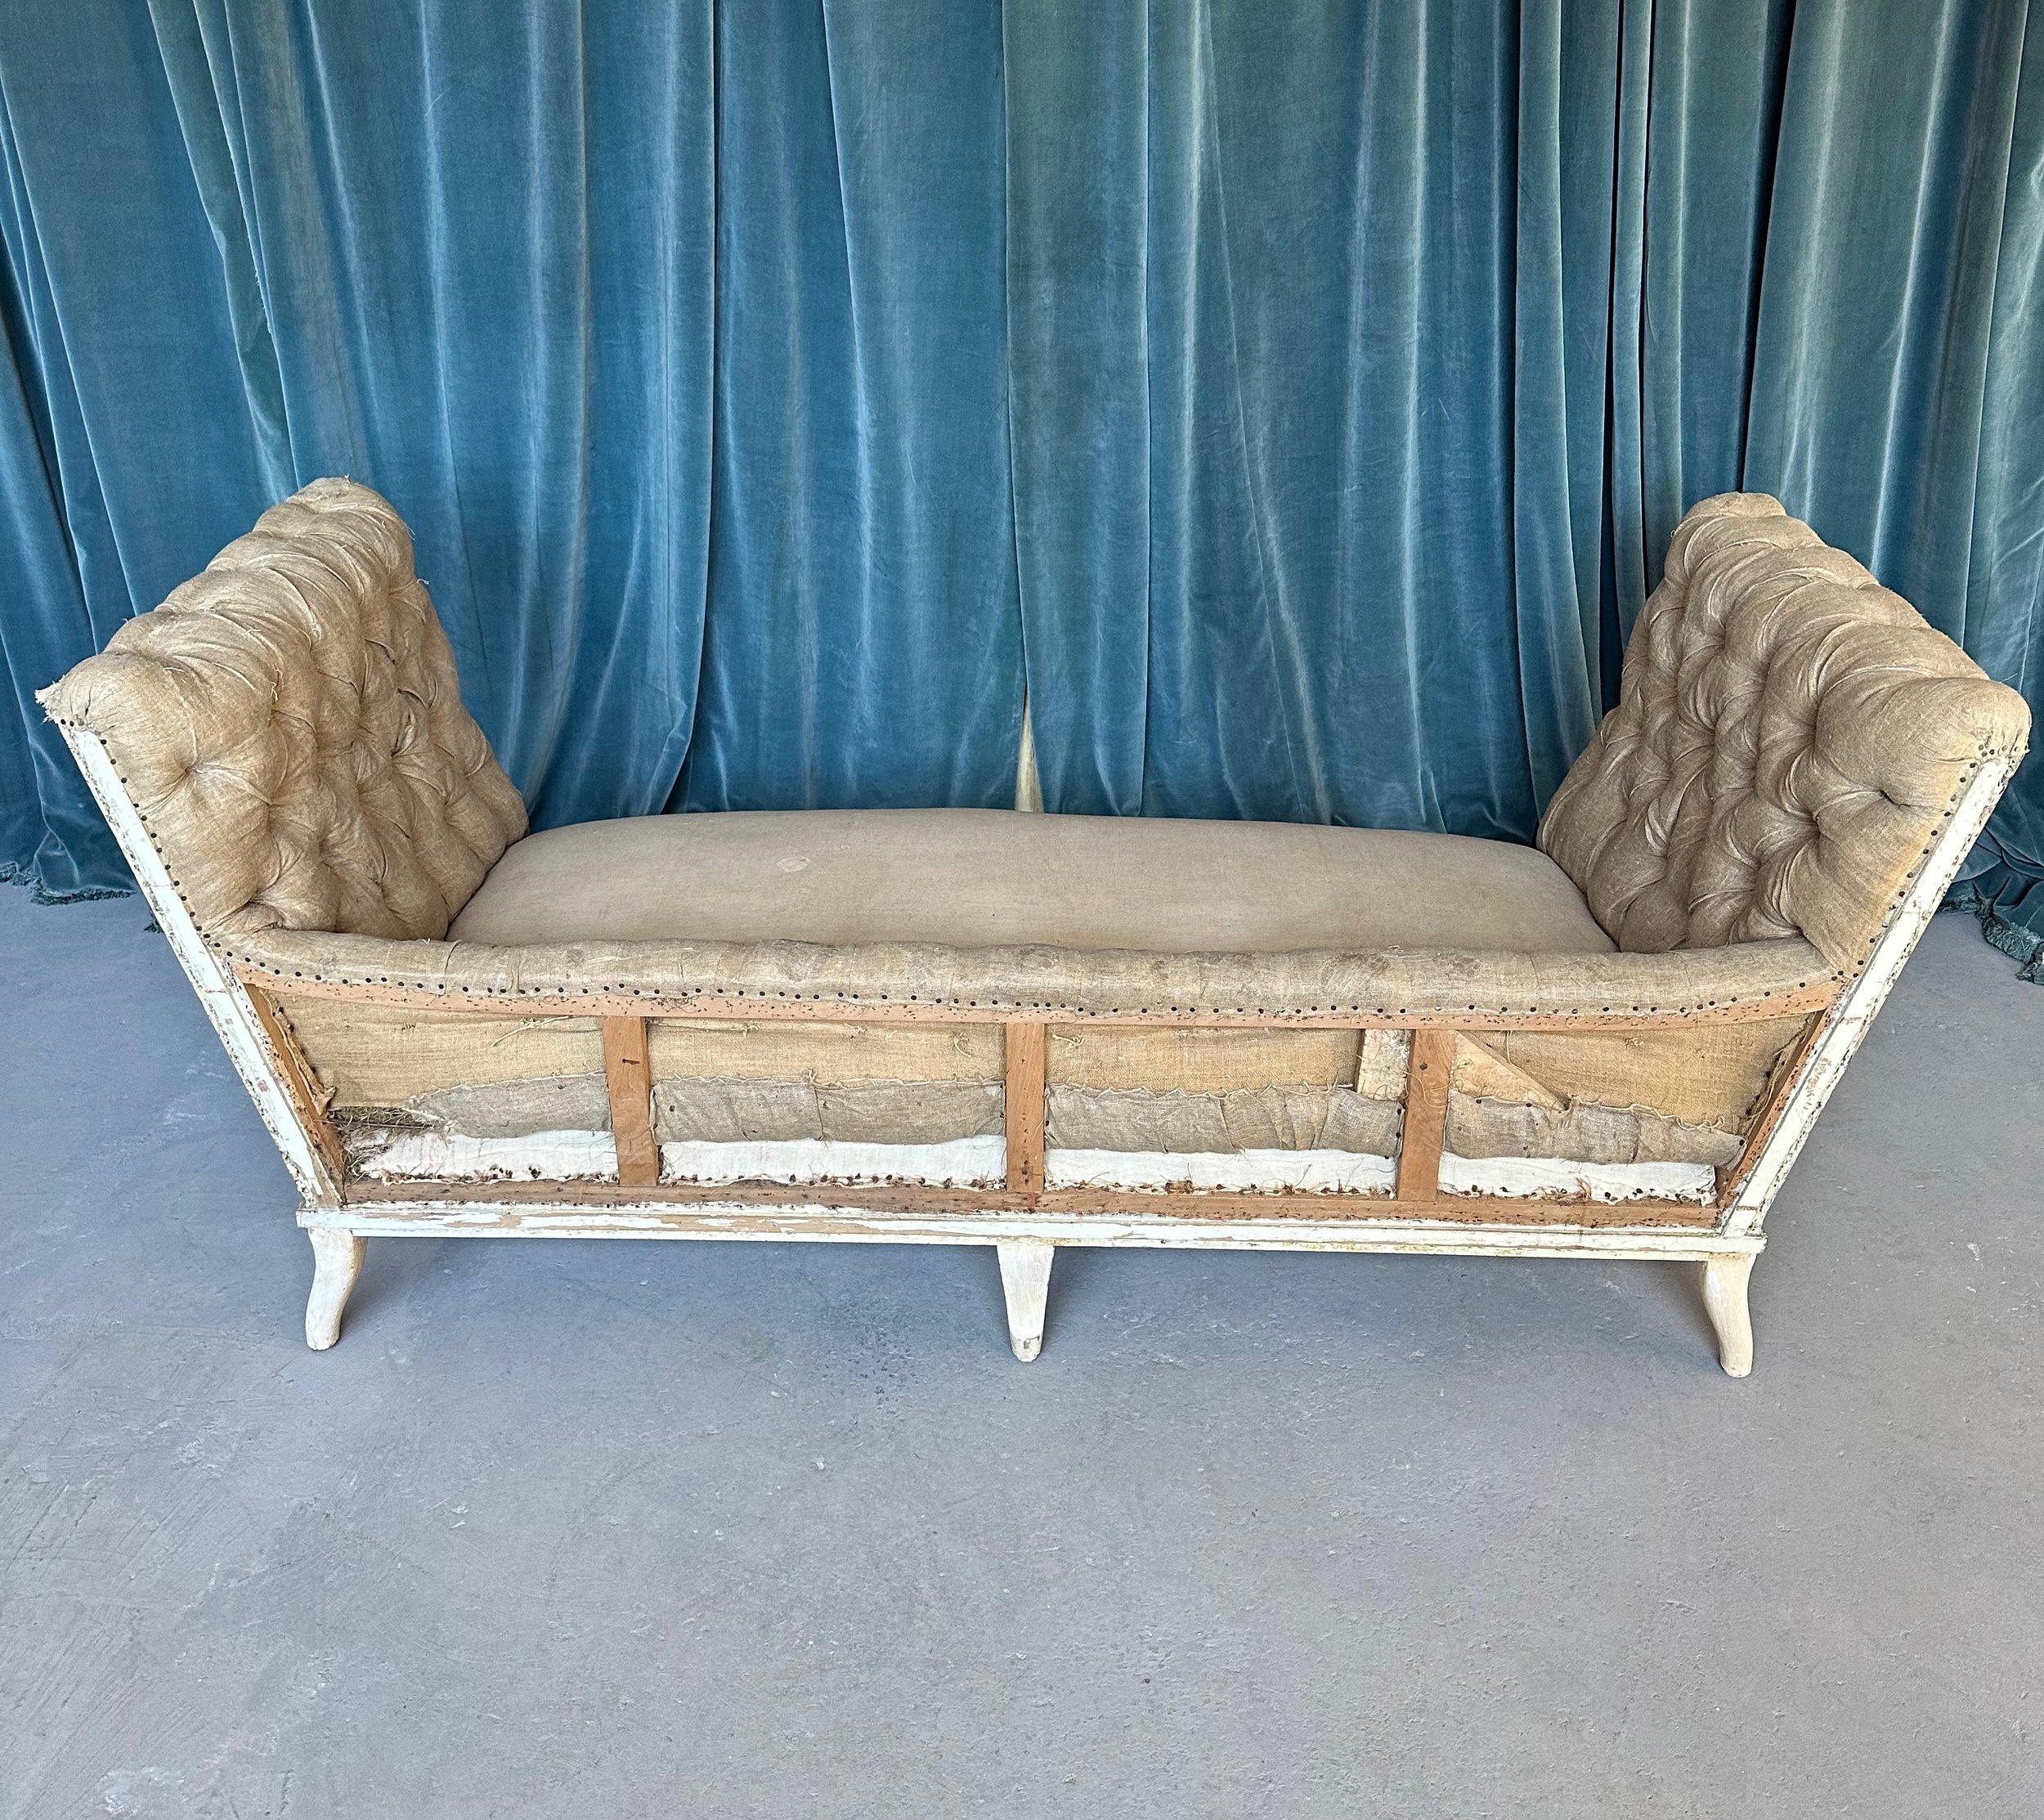 Large French Tufted Napoleon III Sofa with Extended Arms For Sale 6